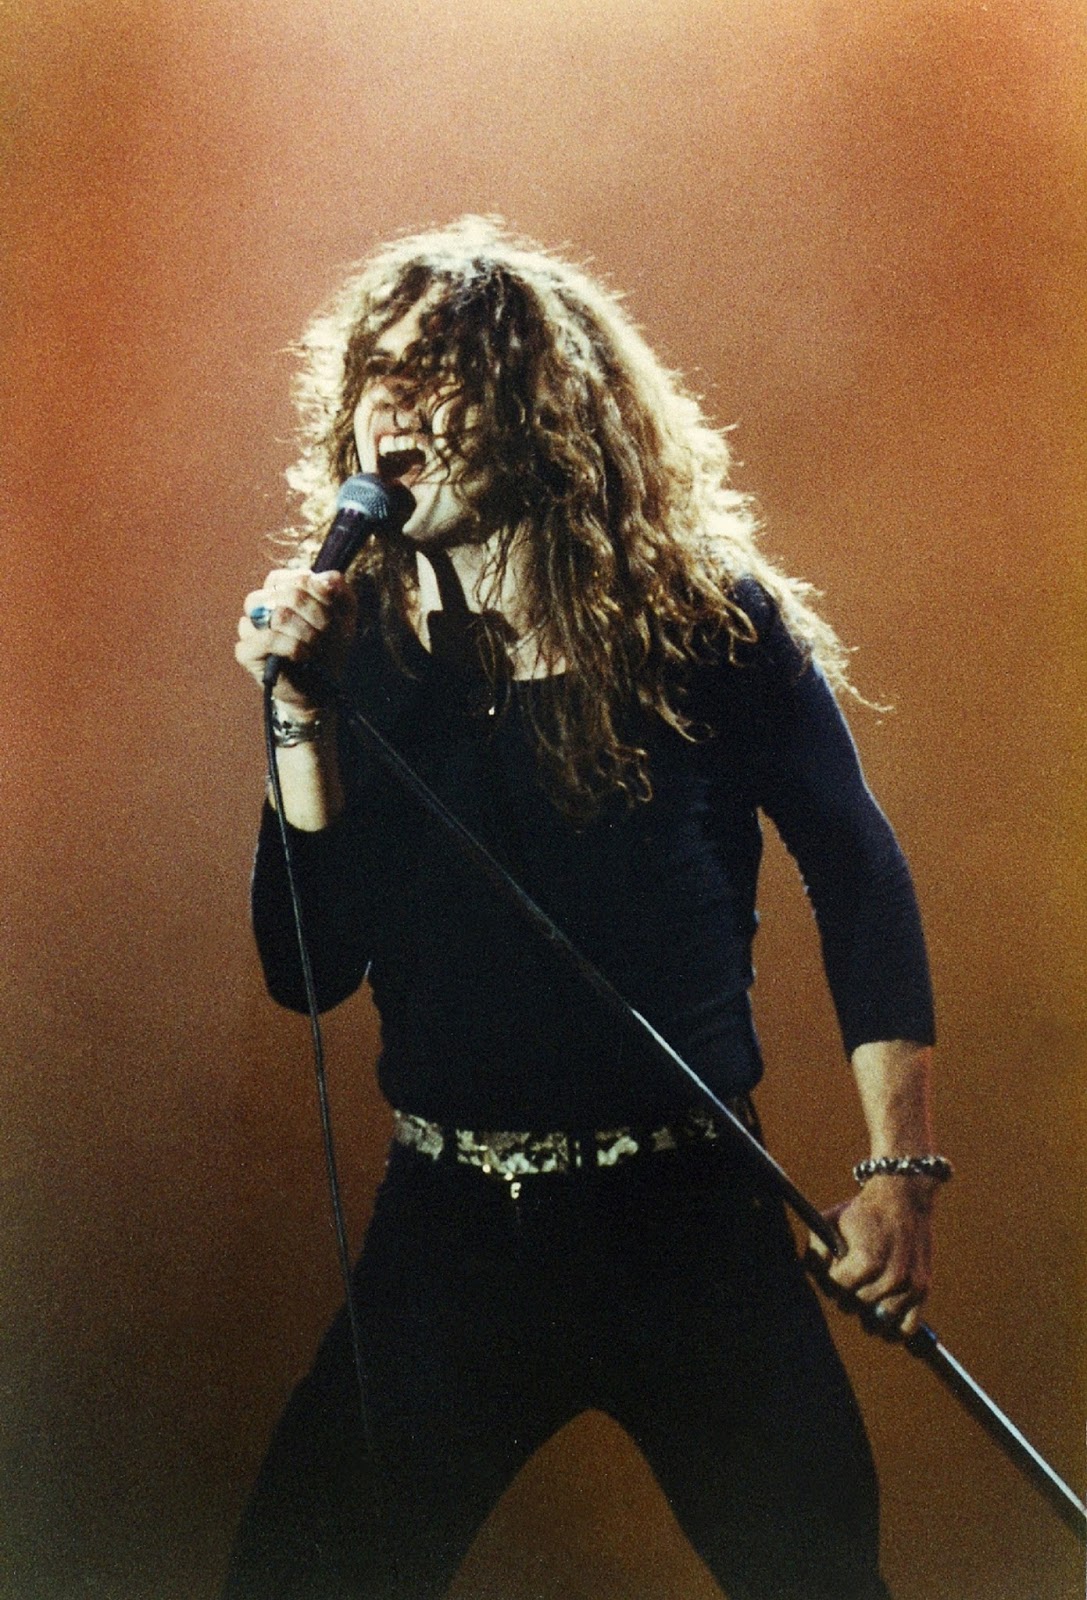 Here's A Song For Ya! - Las mejores canciones de David Coverdale David%2BCoverdale%2Bcirca%2B1980